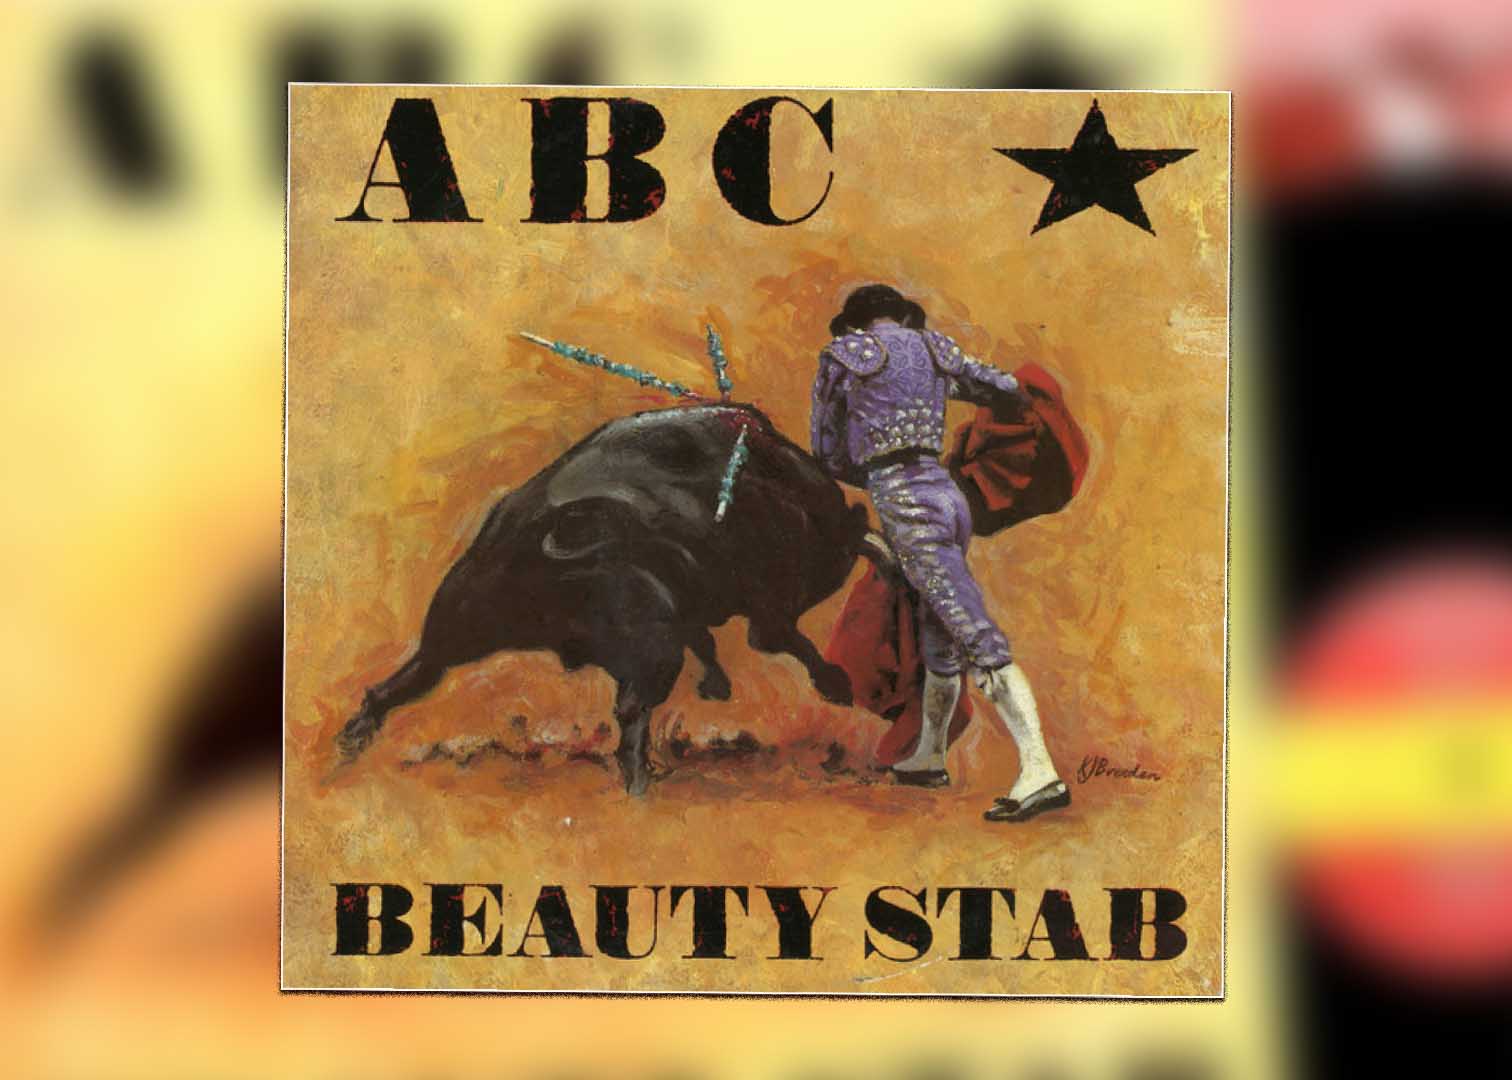 40 Years On: Beauty Stab by ABC